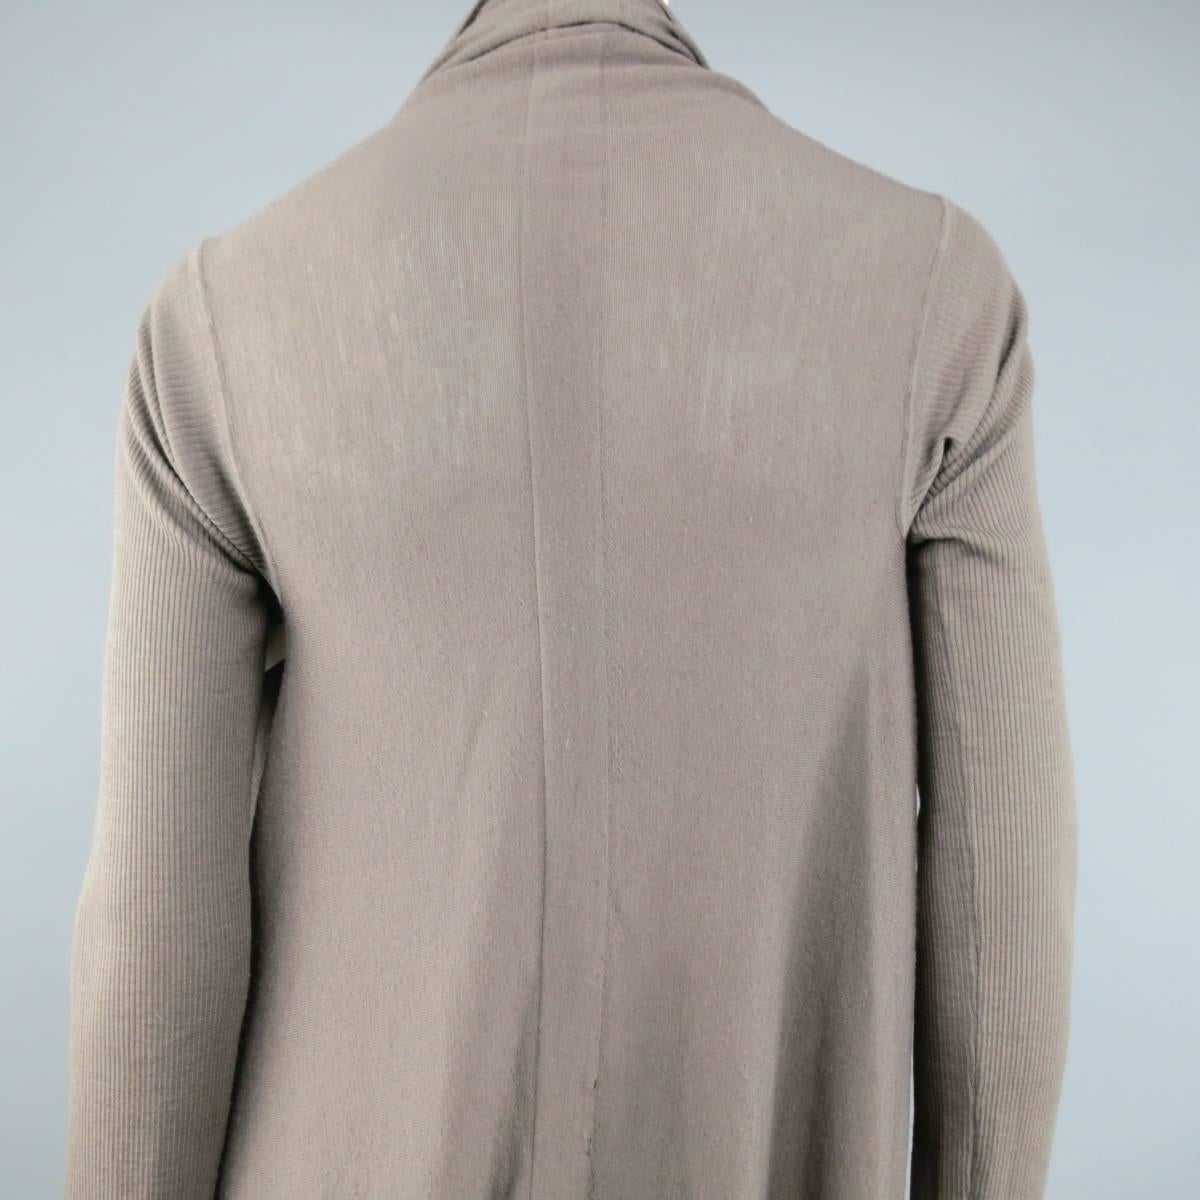 RICK OWENS Cardigan - Women's 2013 - Size S Taupe Ribbed Sleeve Draped 3